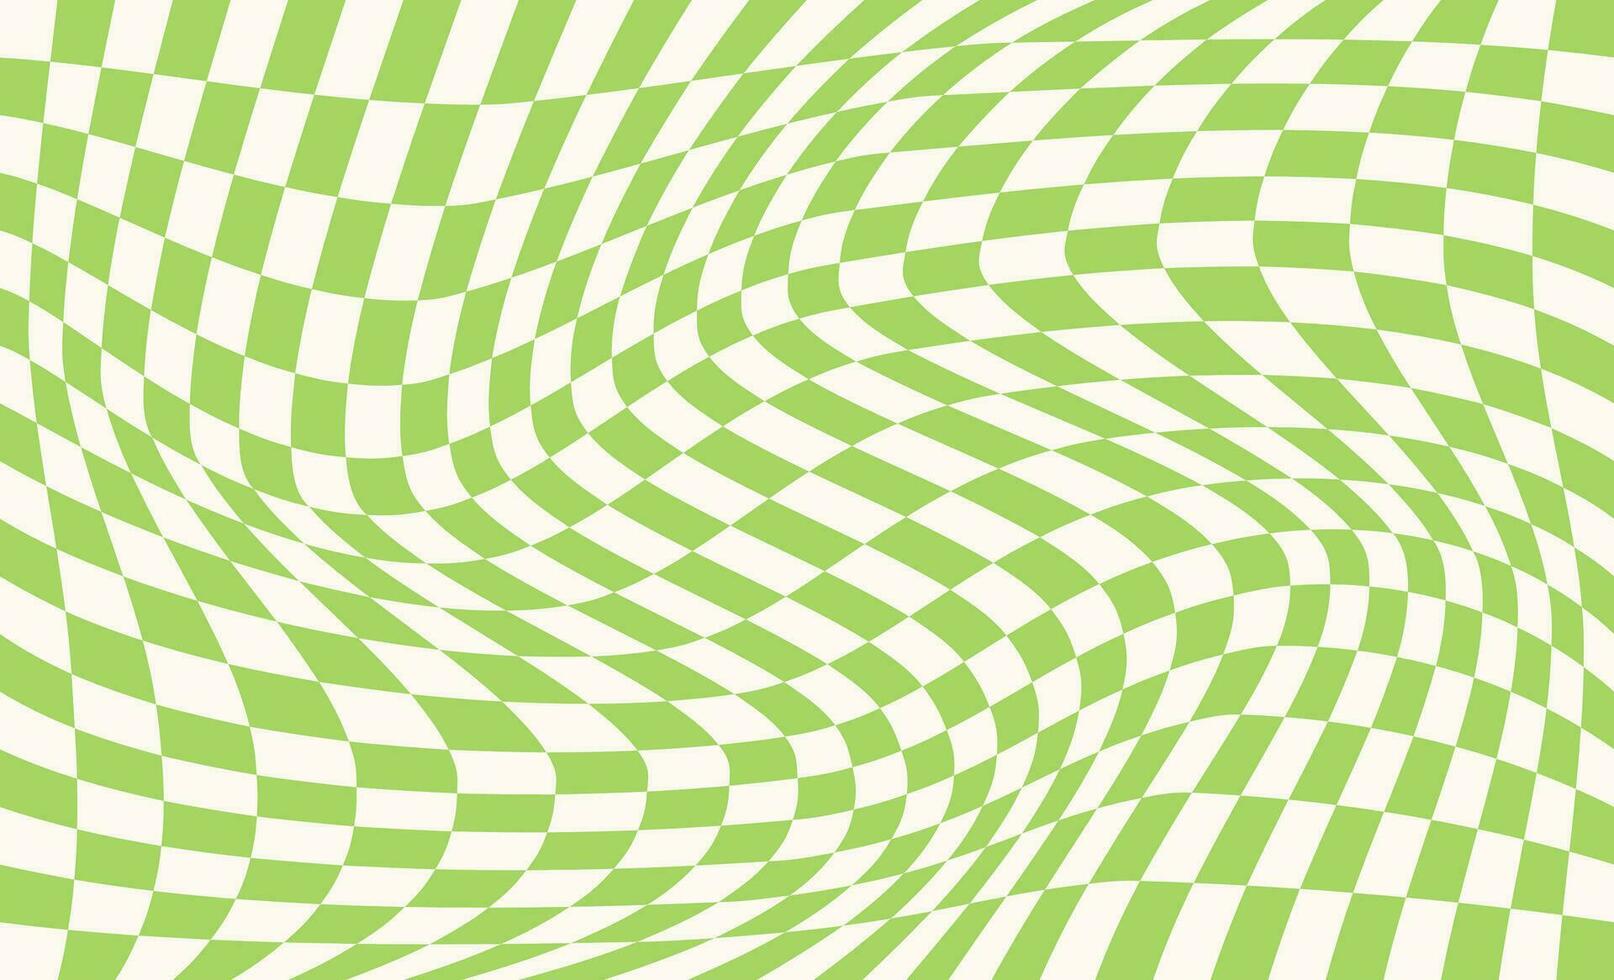 Distorted checkered green background vector